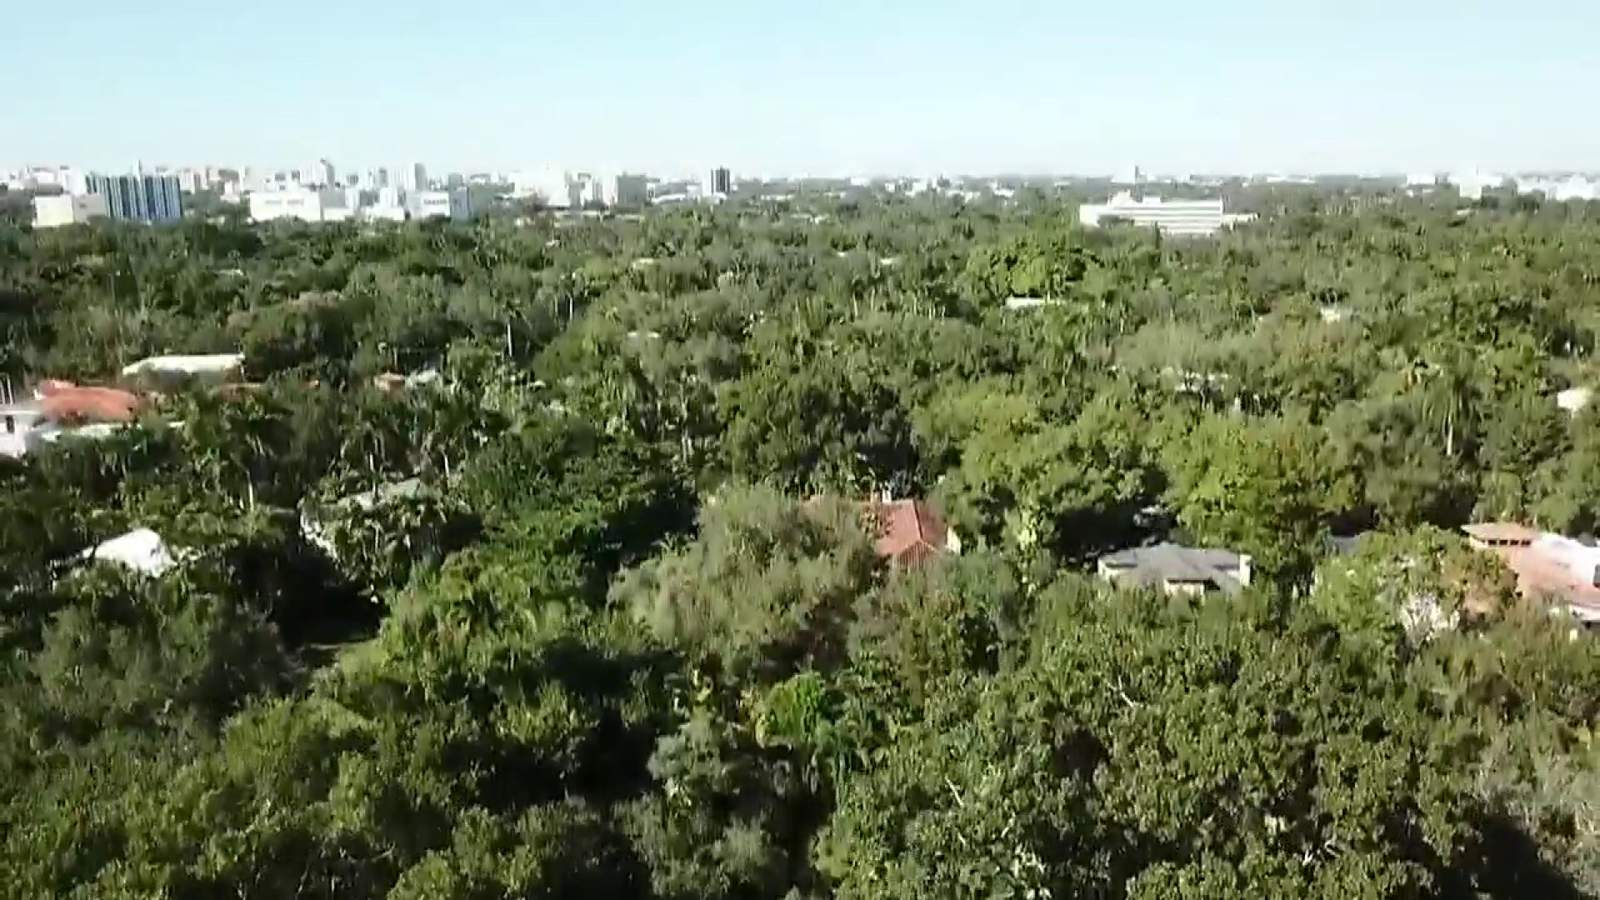 Residents fear ‘Grove Gridlock’ with new private school construction in Coconut Grove